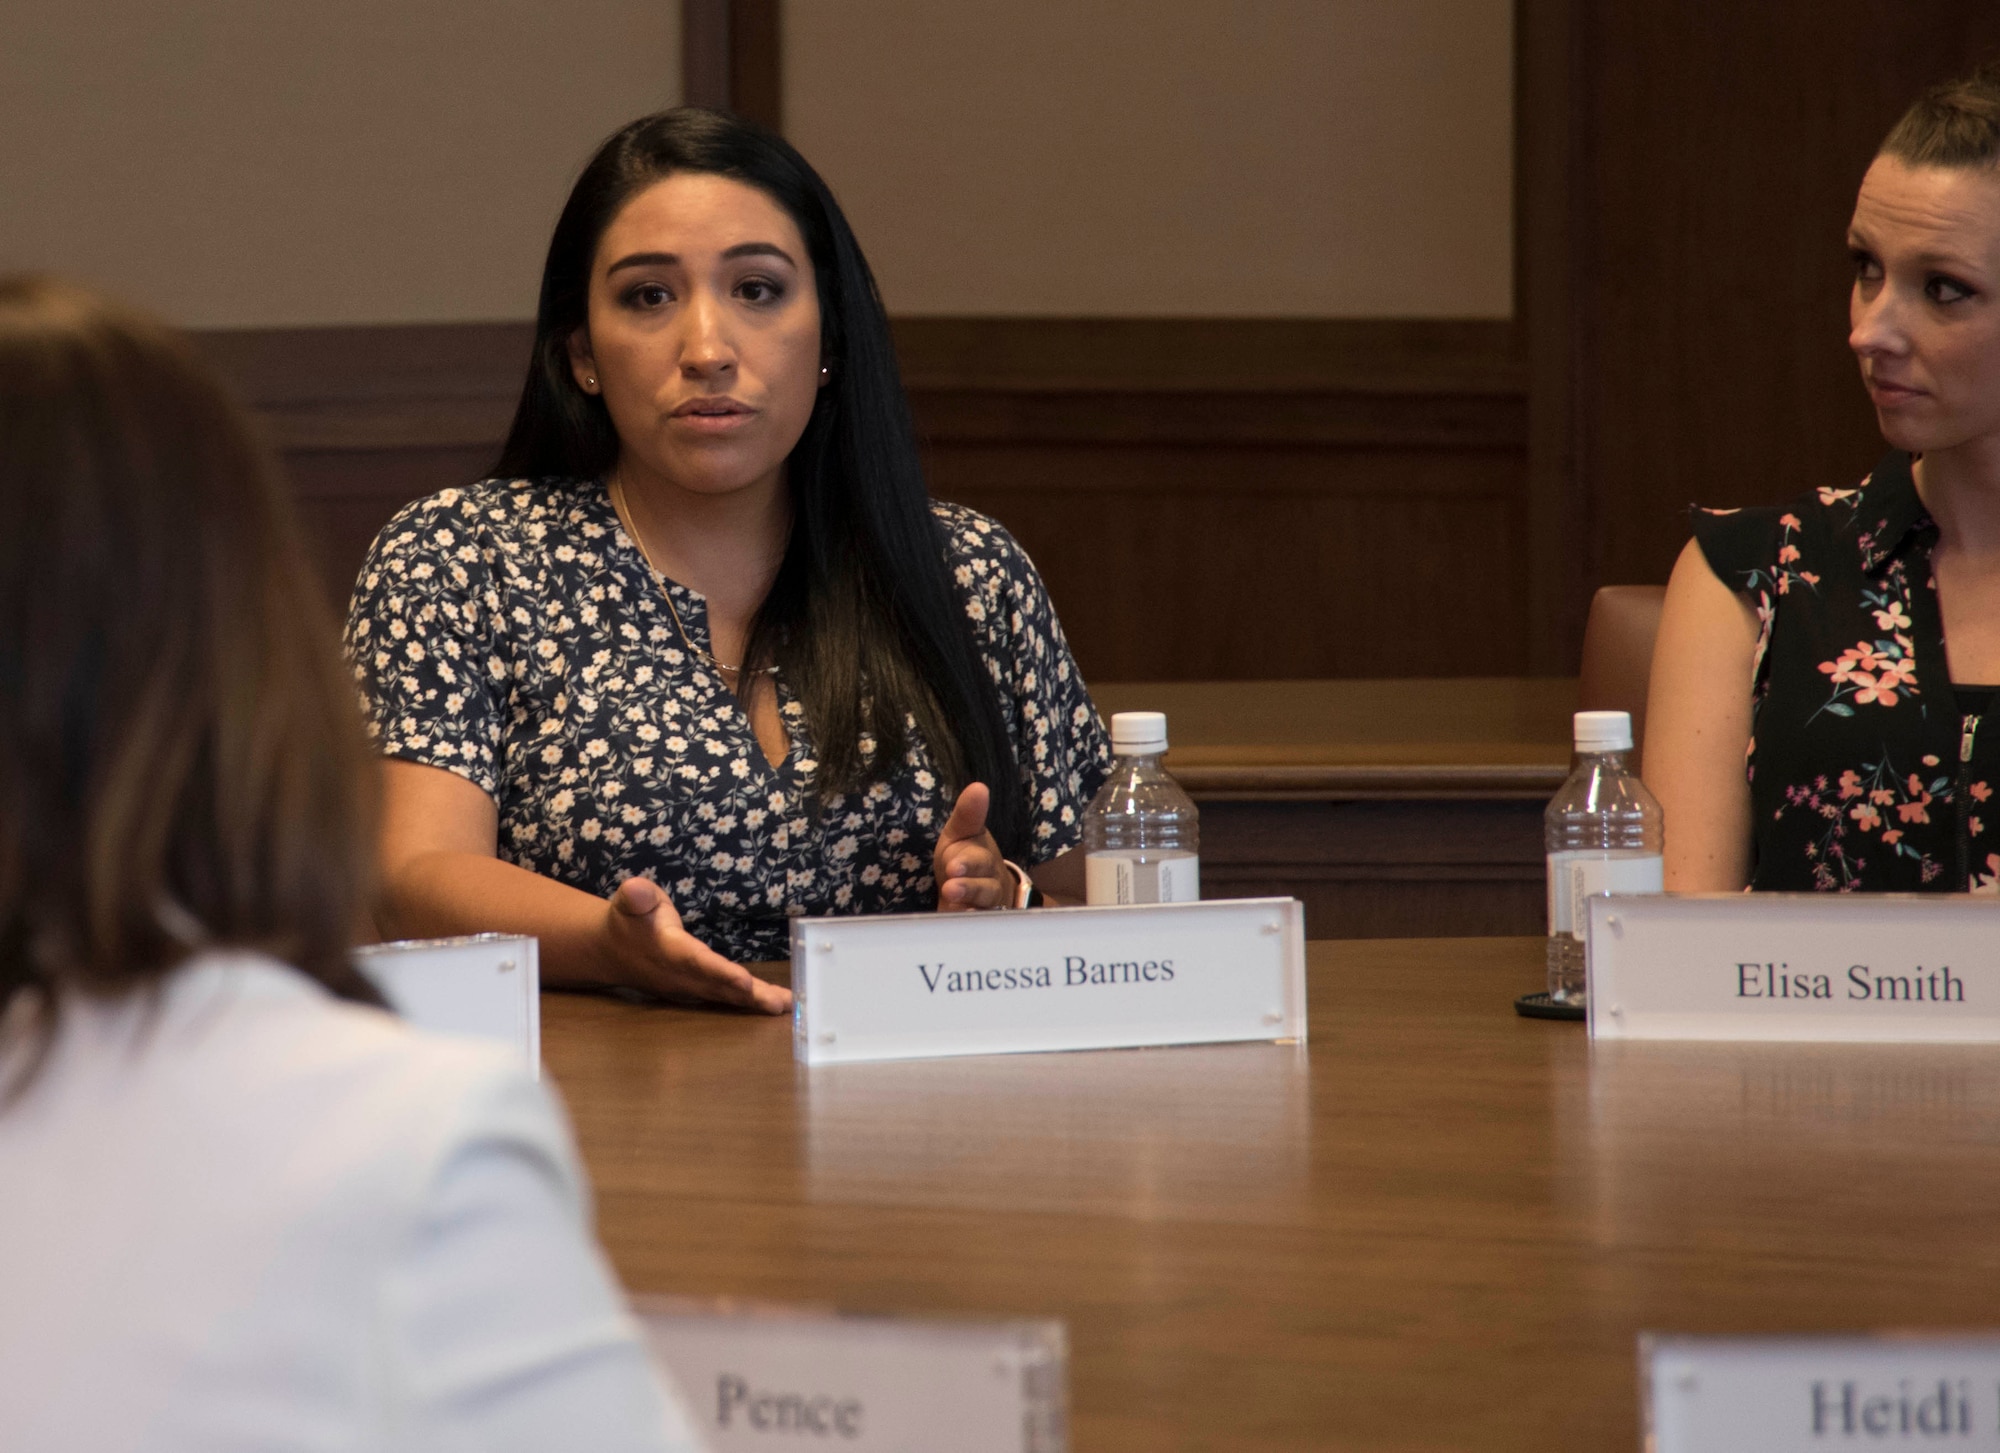 Mrs. Vanessa Barnes, wife of a U.S. Sailor, shares her experiences with Second Lady Karen Pence during a round table meeting with military spouses from all branches, Friday, May 4, 2018, at the George W. Bush Presidential Center, Dallas, Texas. Pence has visited other locations to speak with military spouses, including Luke Air Force Base, Arizona and Yokota Air Base, Japan. (U.S. Air Force photos by Tech. Sgt. Melissa Harvey)